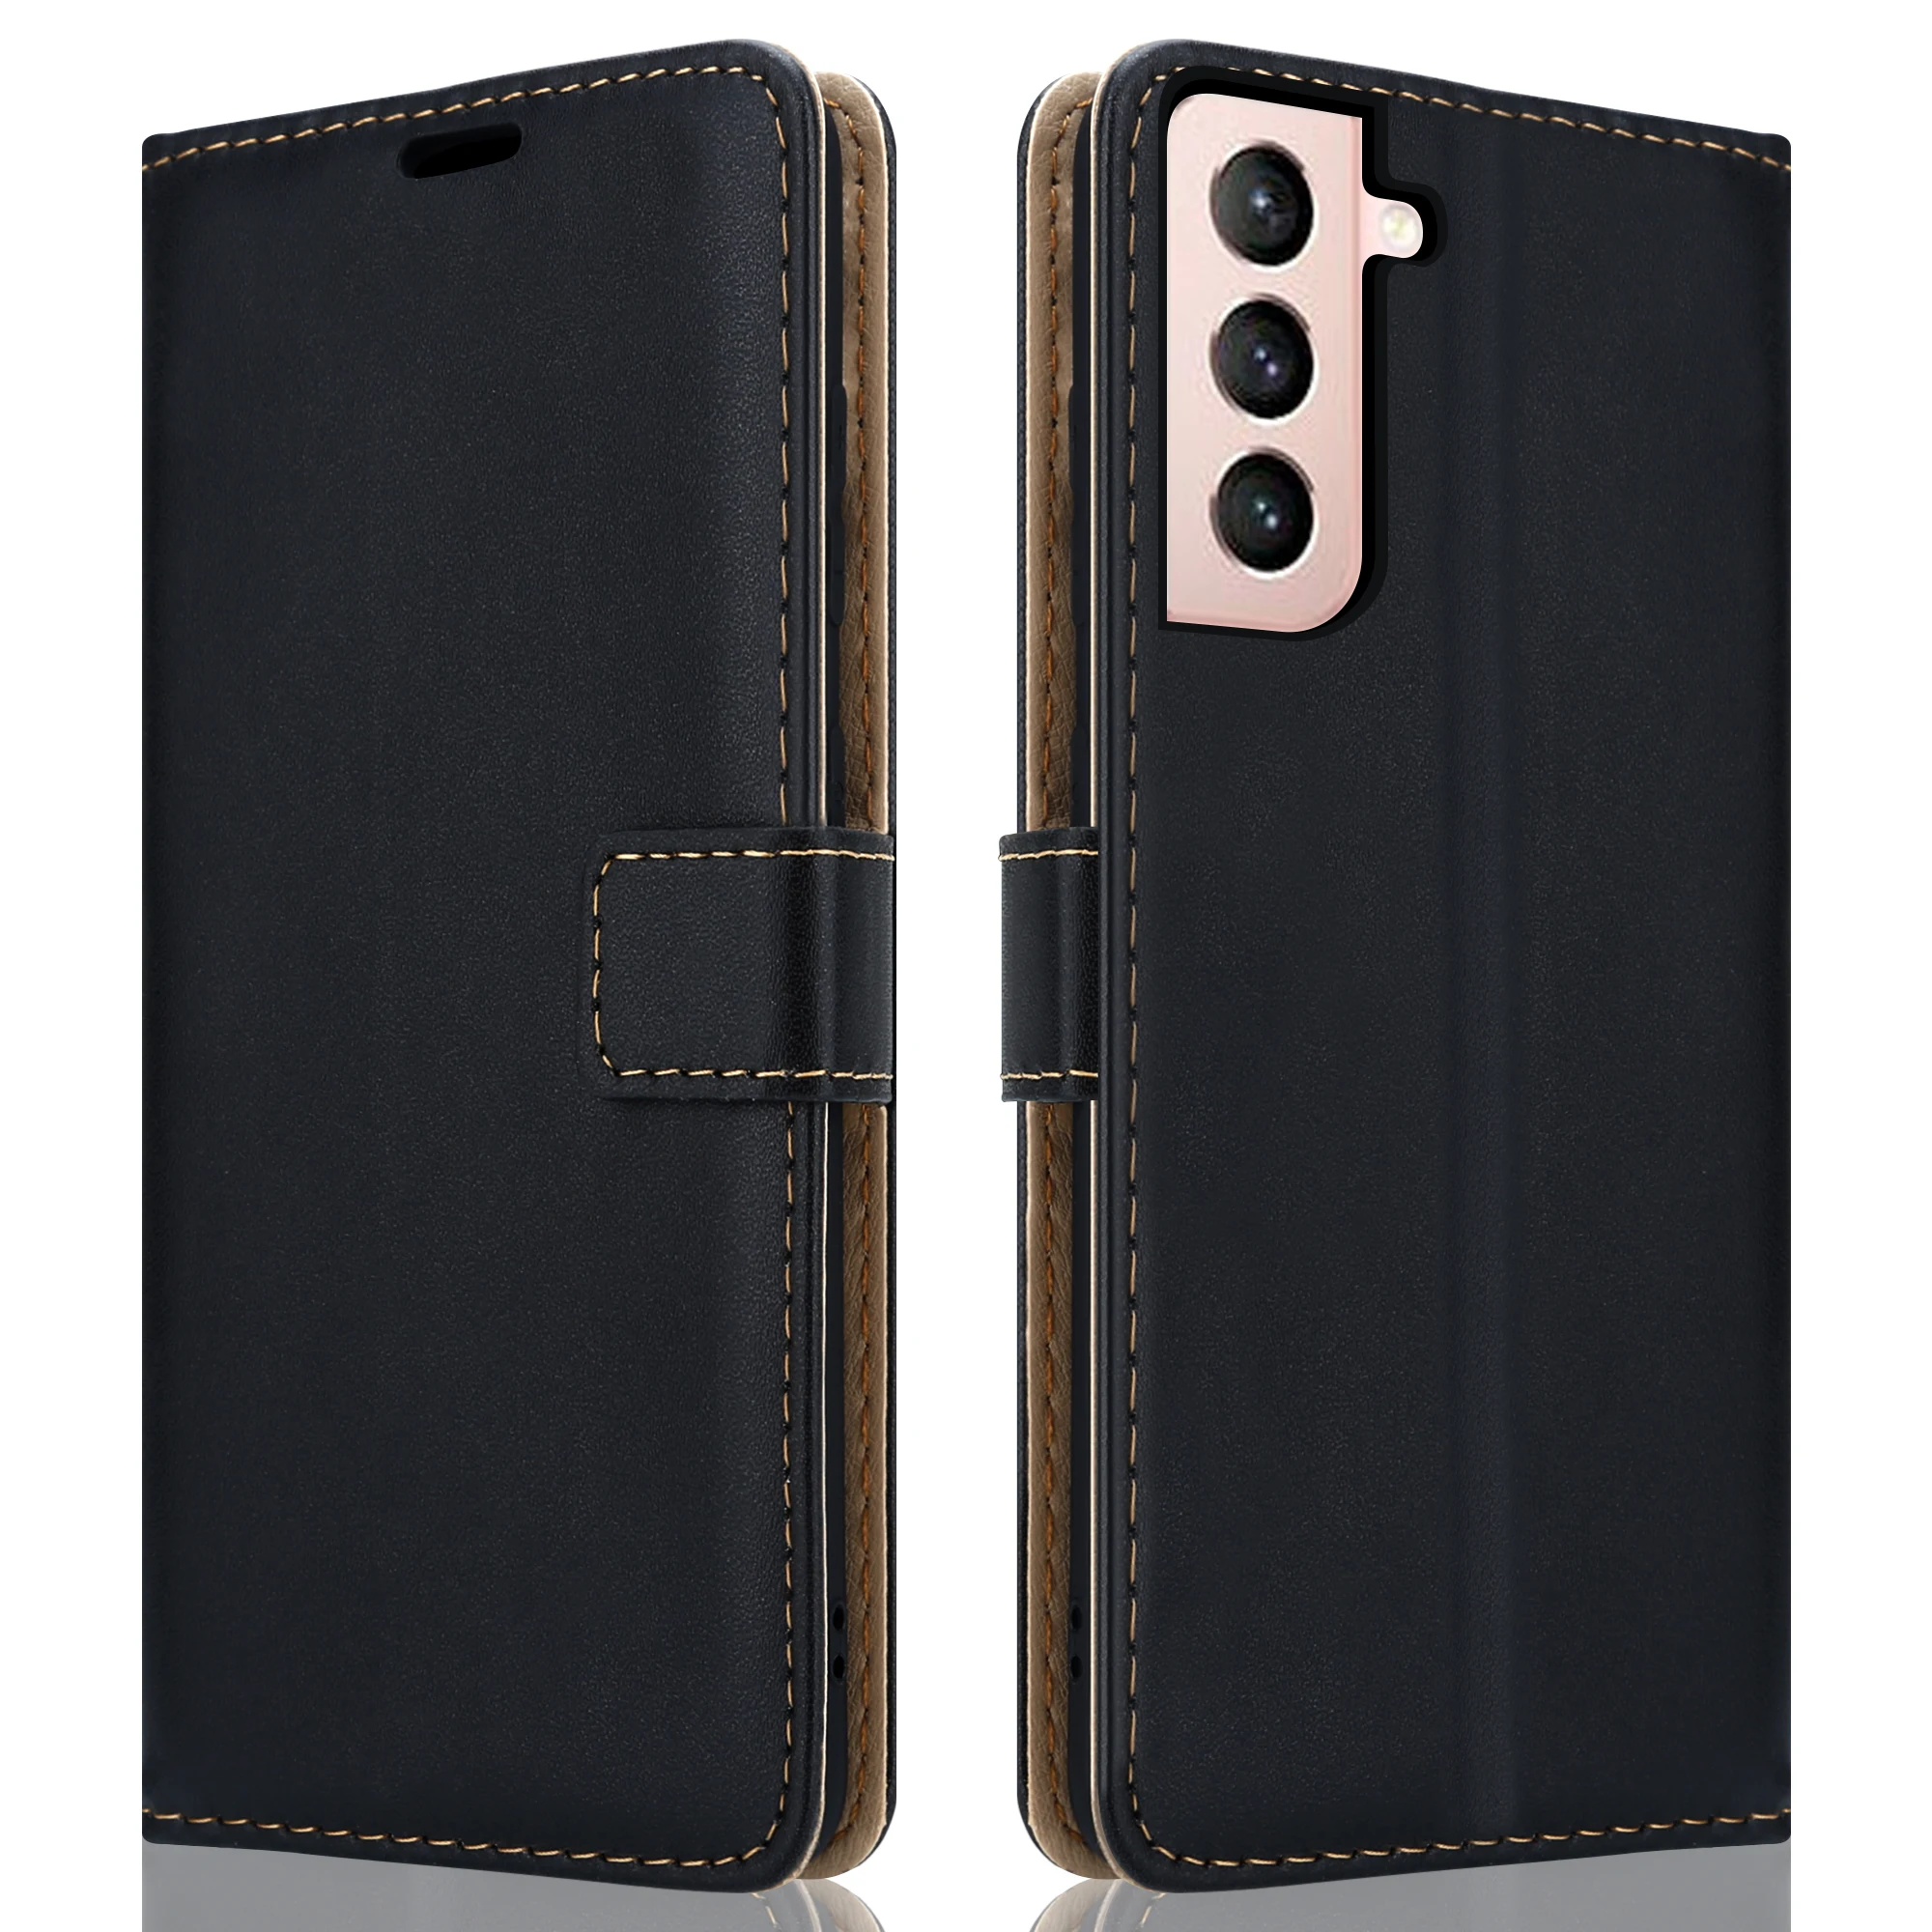 Pu Leather Phone Case With Card Holder Wallet For Samsung S21 Shockproof Phone Case For Samsung S21 Plus Buy Business One Hundred Grain Pu Leather Case Mobile Phone Case For Samsung S21 S30 Mobile Phone